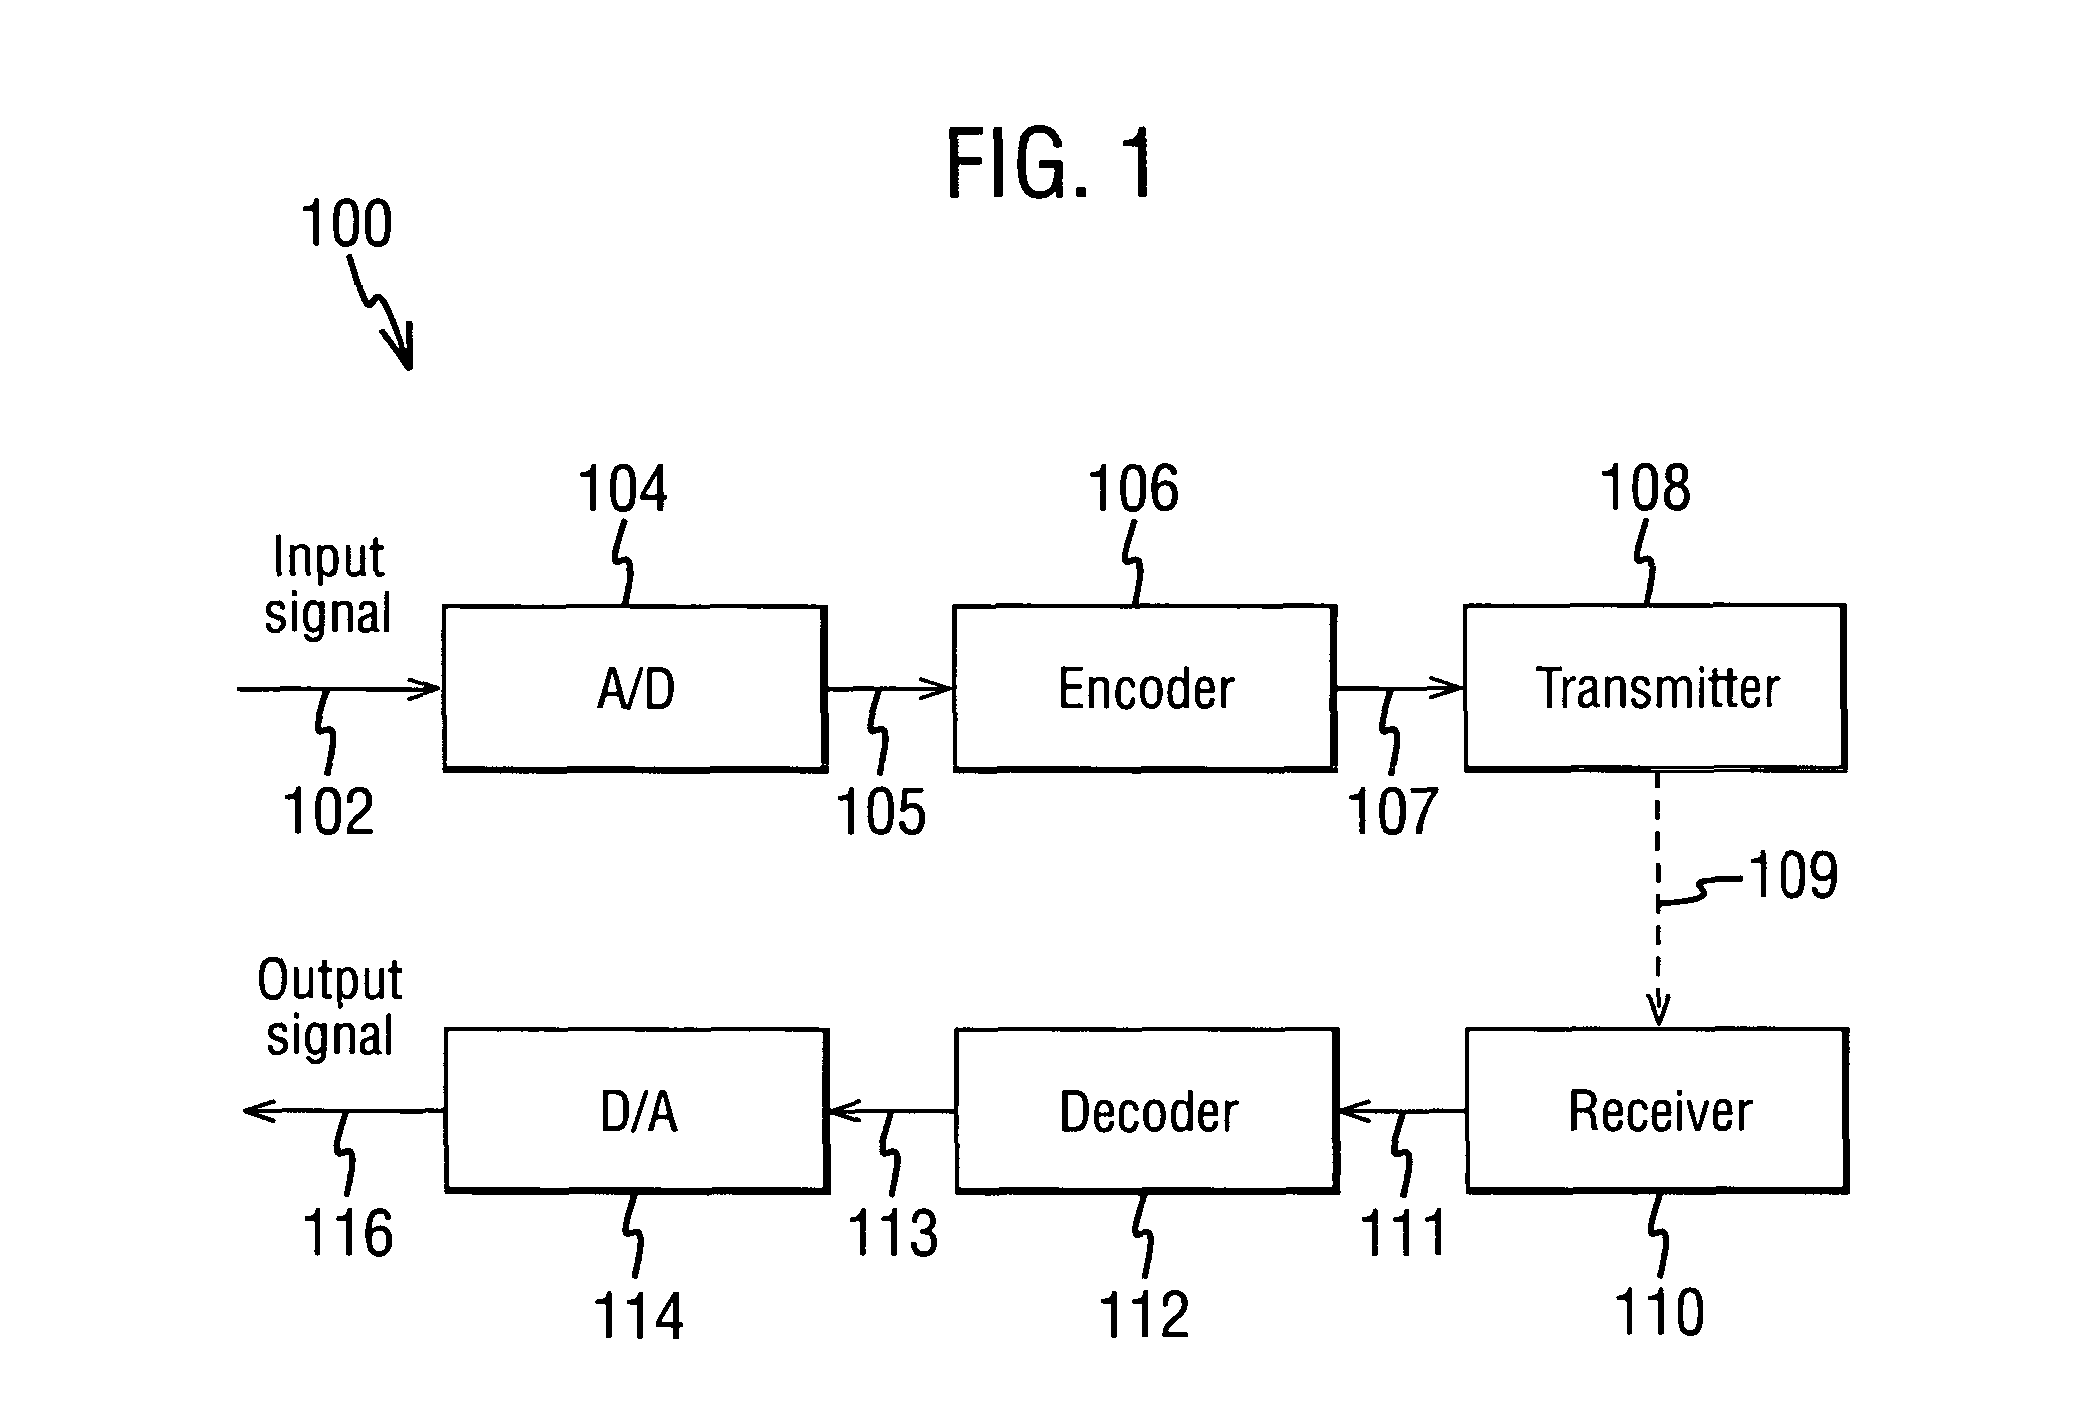 Signal encoding a frame in a communication system